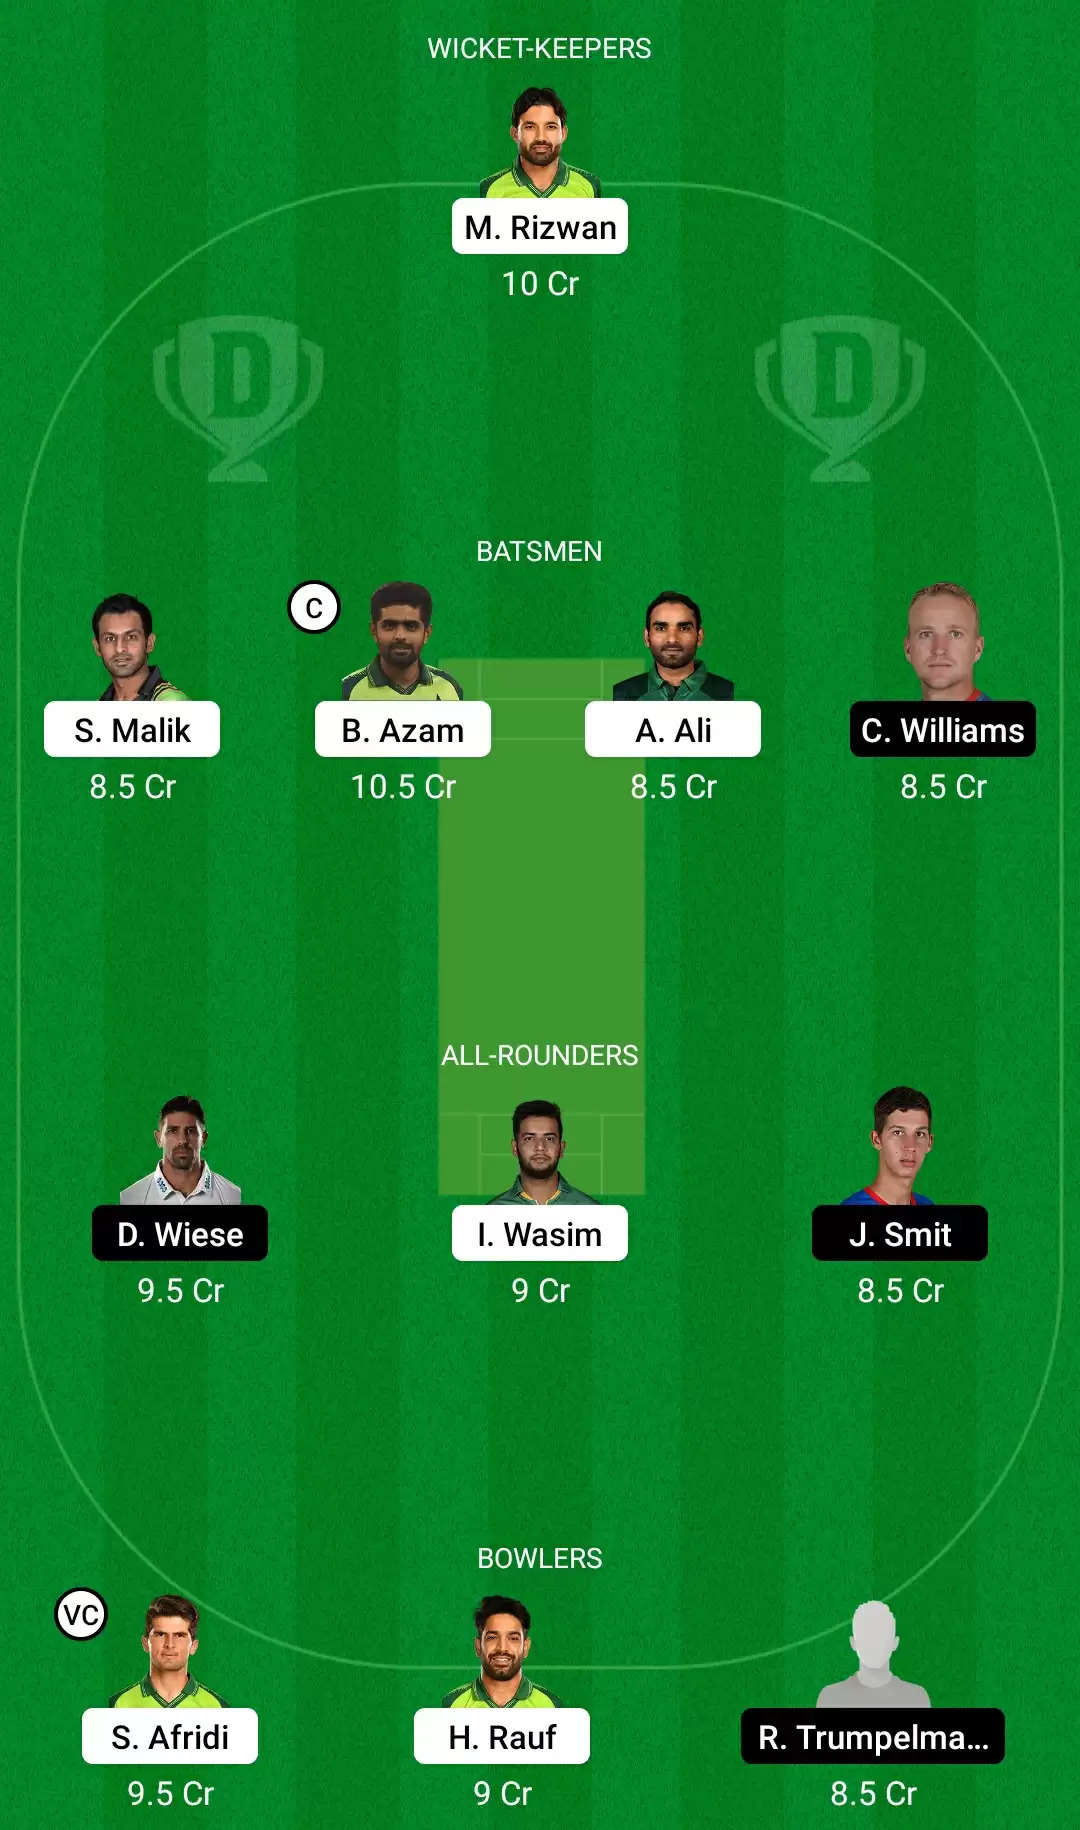 PAK vs NAM Dream11 Prediction for T20 World Cup 2021: Playing XI, Fantasy Cricket Tips, Team, Weather Updates and Pitch Report